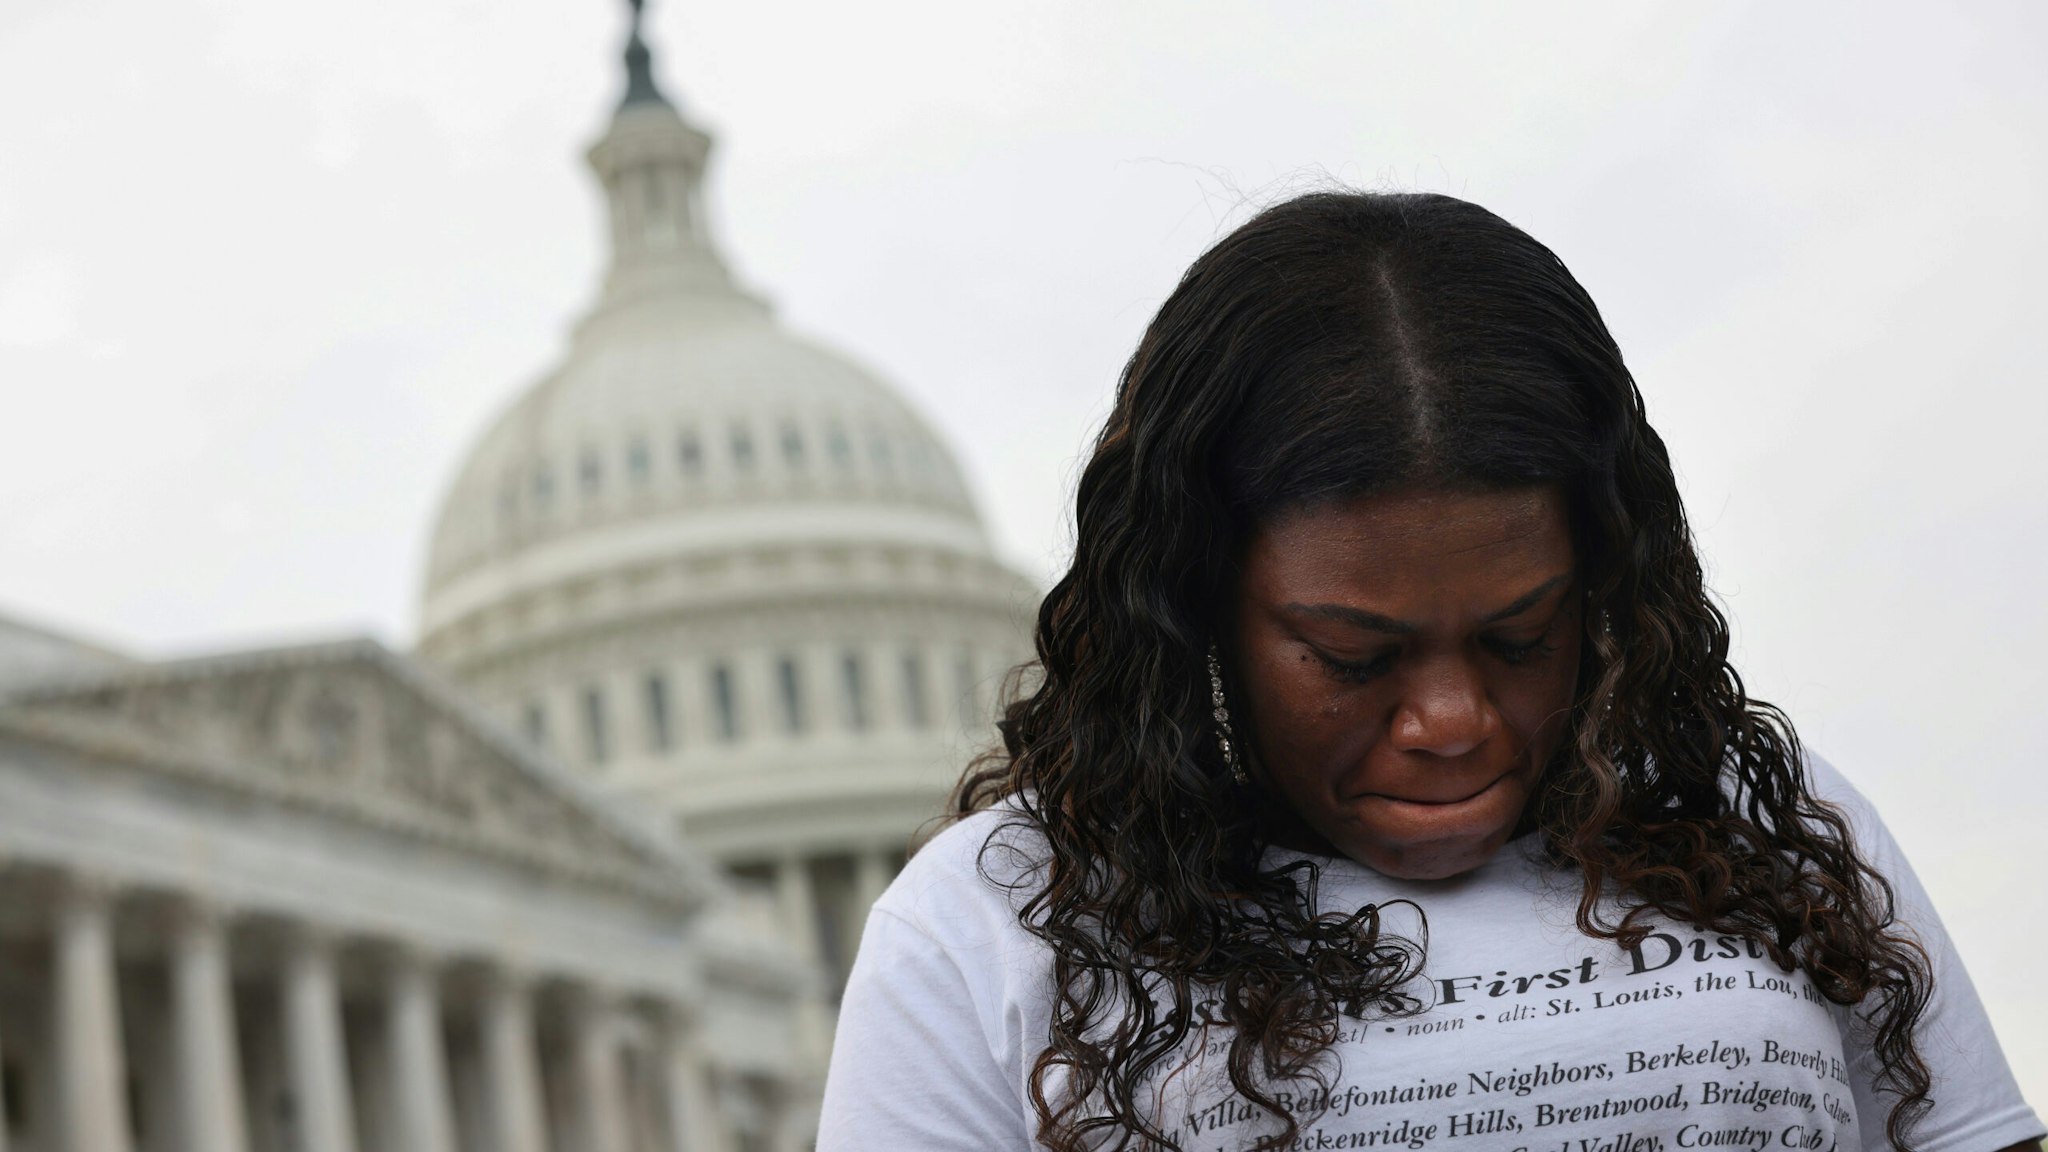 WASHINGTON, DC - AUGUST 03: U.S. Rep. Cori Bush (D-MO) becomes emotional during a news conference on the eviction moratorium at the Capitol on August 03, 2021 in Washington, DC. News organizations reported that the Biden Administration plans to institute a new eviction moratorium for areas with high levels of COVID-19, days after Bush started camping out on the steps of the Capitol Building to protest the end of the Centers for Disease Control and Prevention's original moratorium. (Photo by Kevin Dietsch/Getty Images)